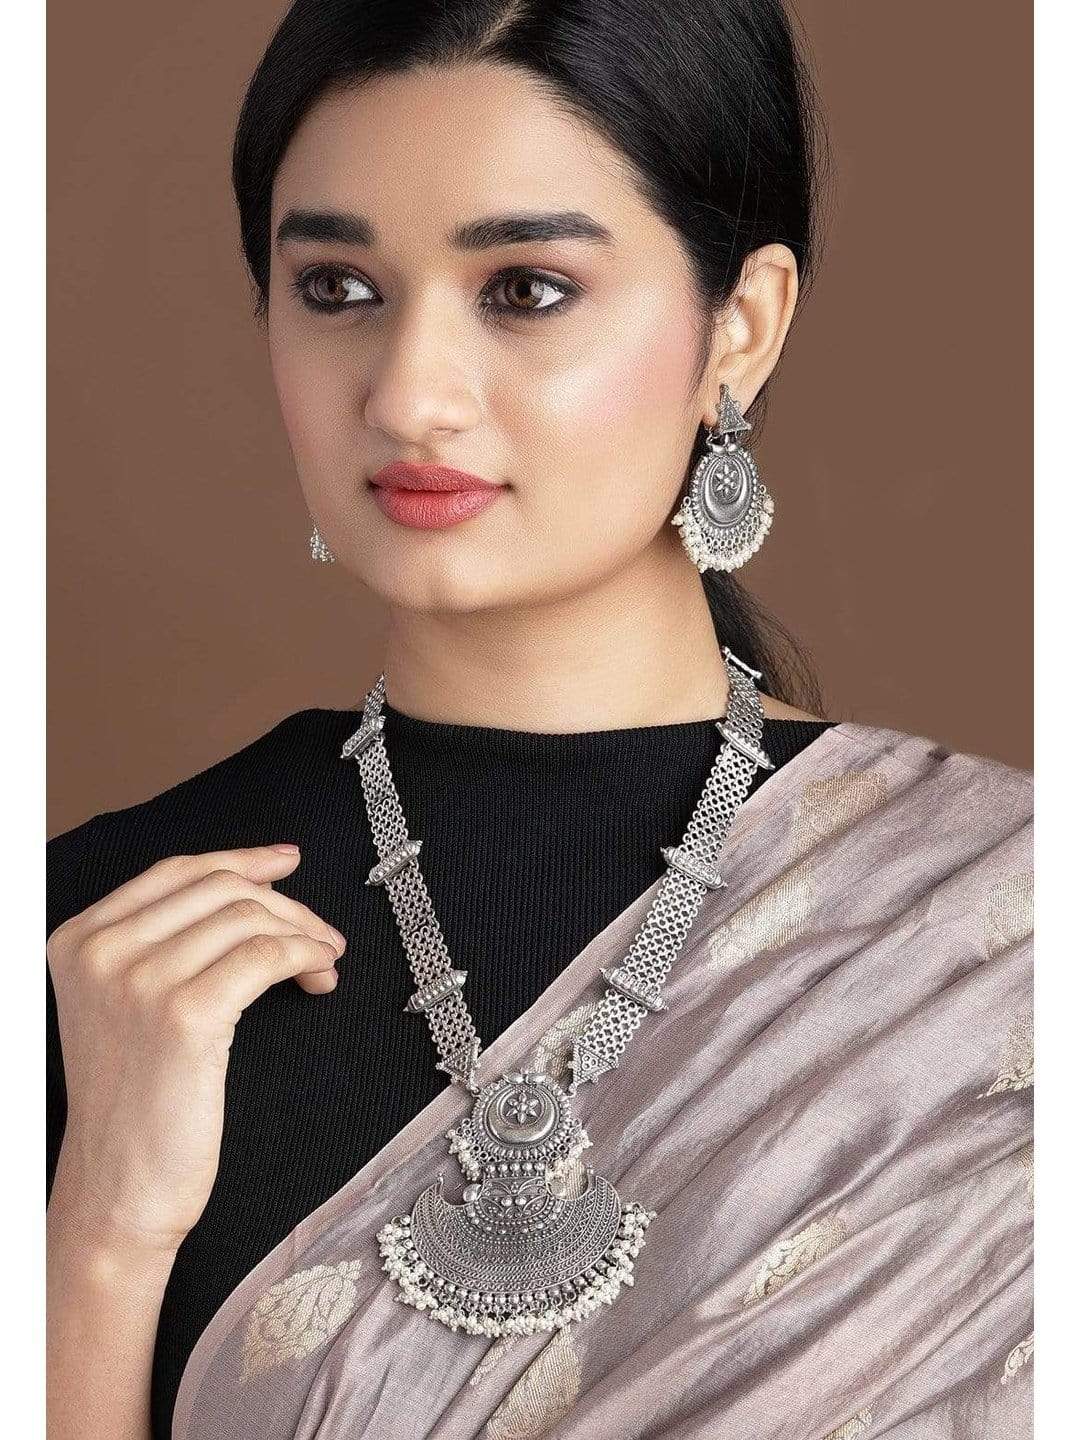 Rubans Silver Plated Handcrafted Oxidised Filigree  Necklace Set Necklace Set